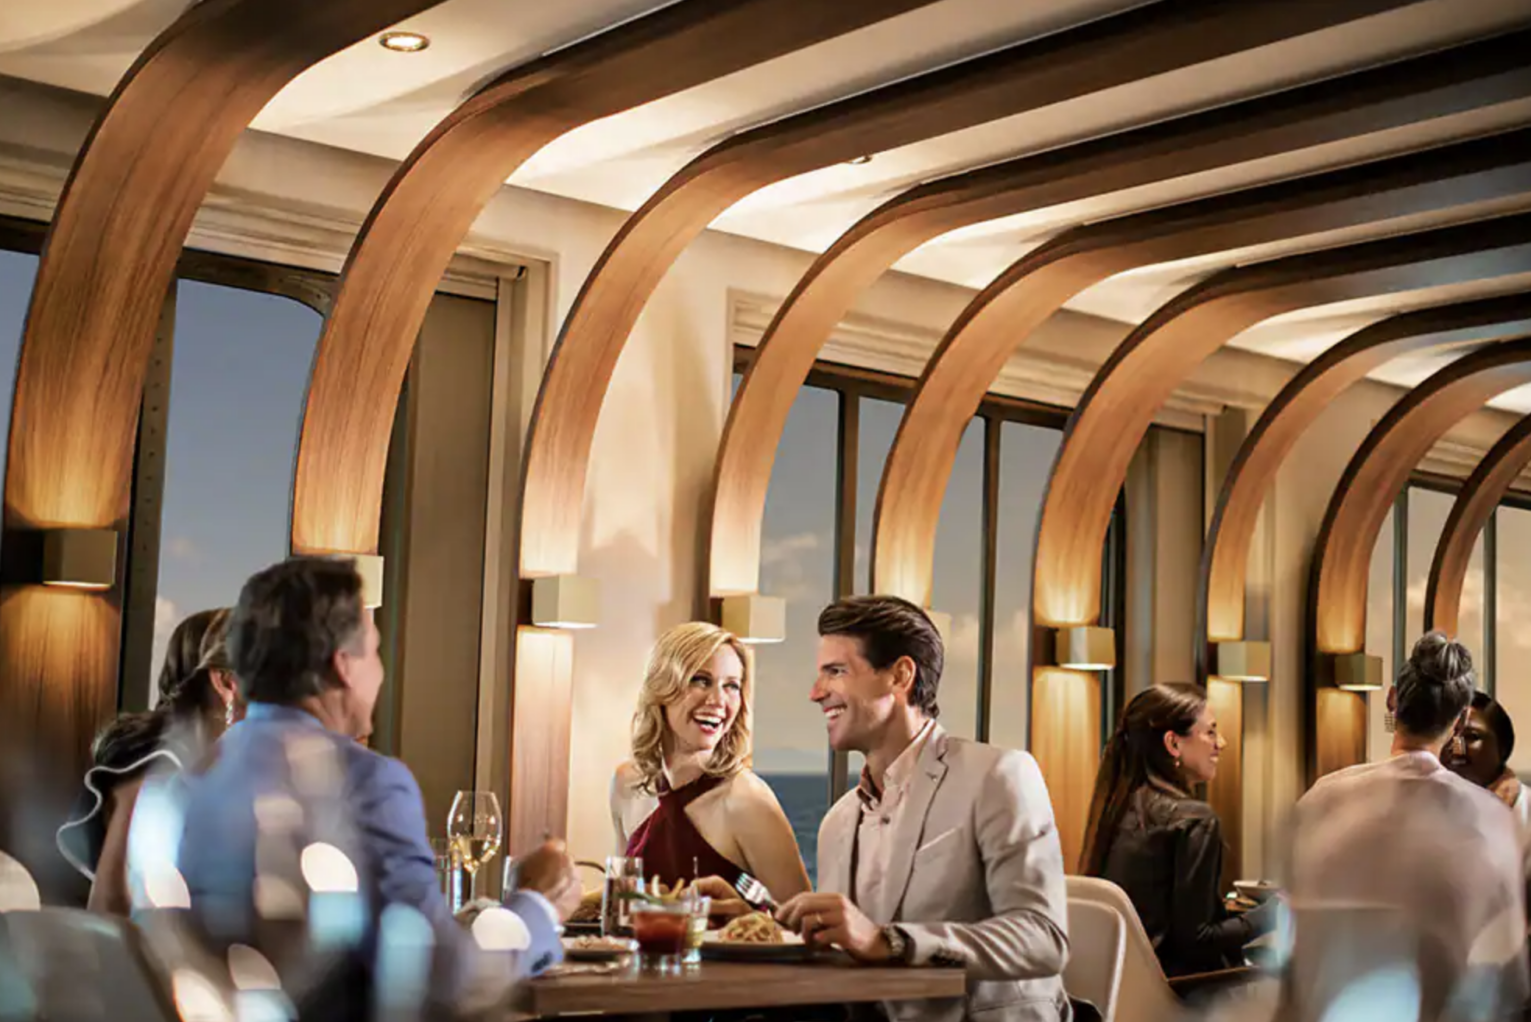 Cruisers can find cuisines from all around the world on large ships